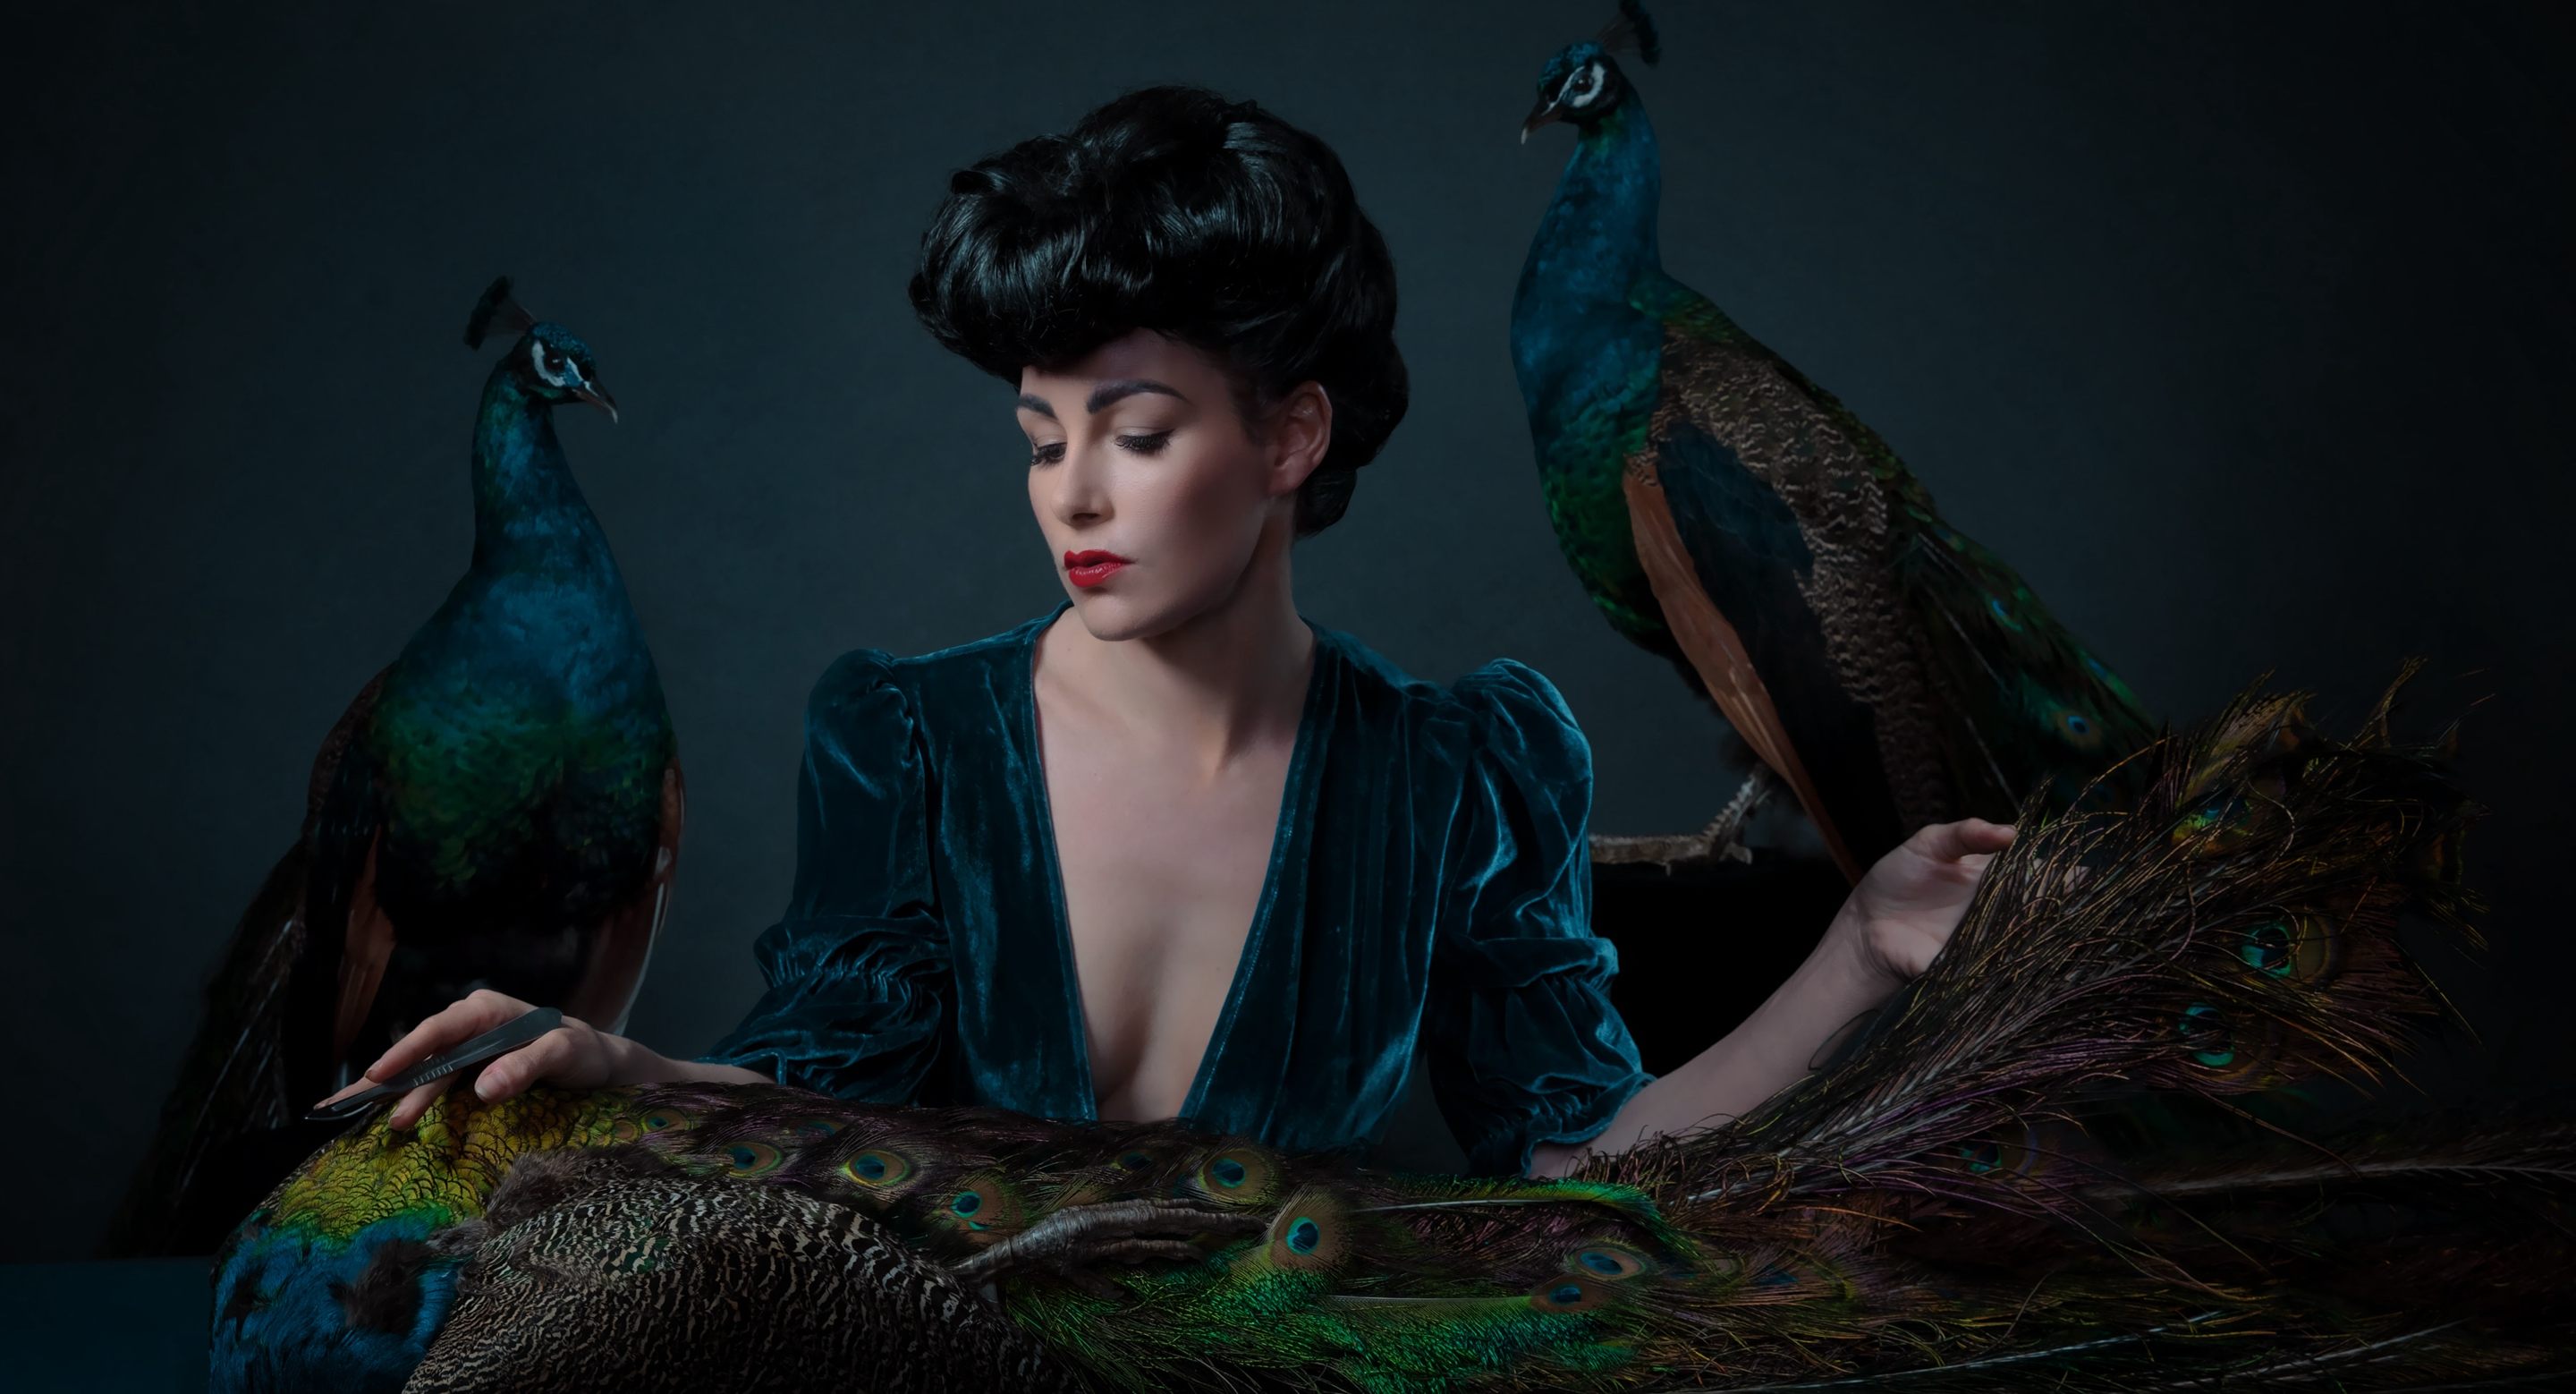 Allis Markham, an Atlas Obscura Courses instructor, poses with two taxidermied peacocks.